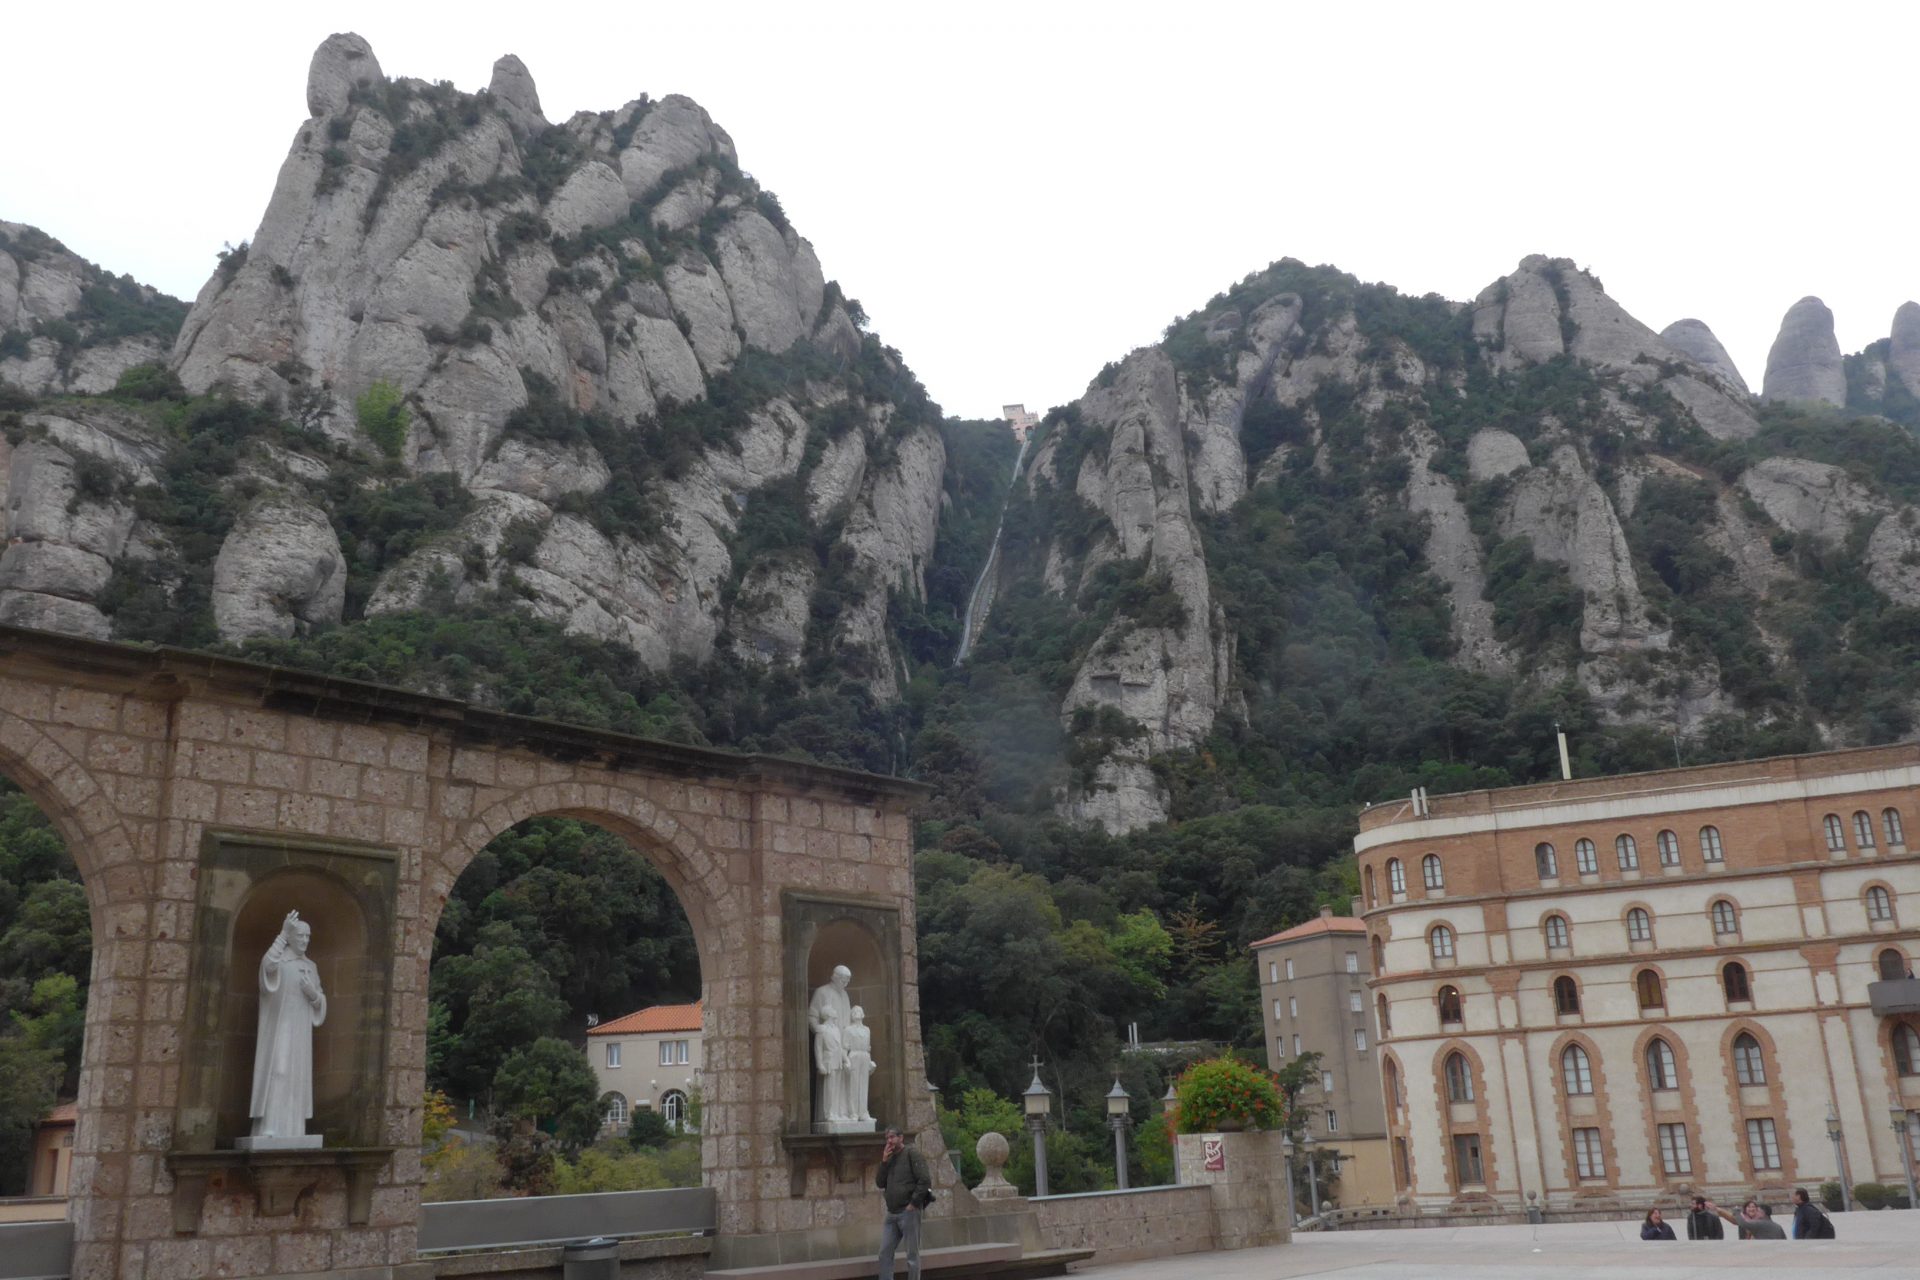 The Complete Guide to a Day Trip to Montserrat: How to get there from Barcelona, what to bring and what to do and see!